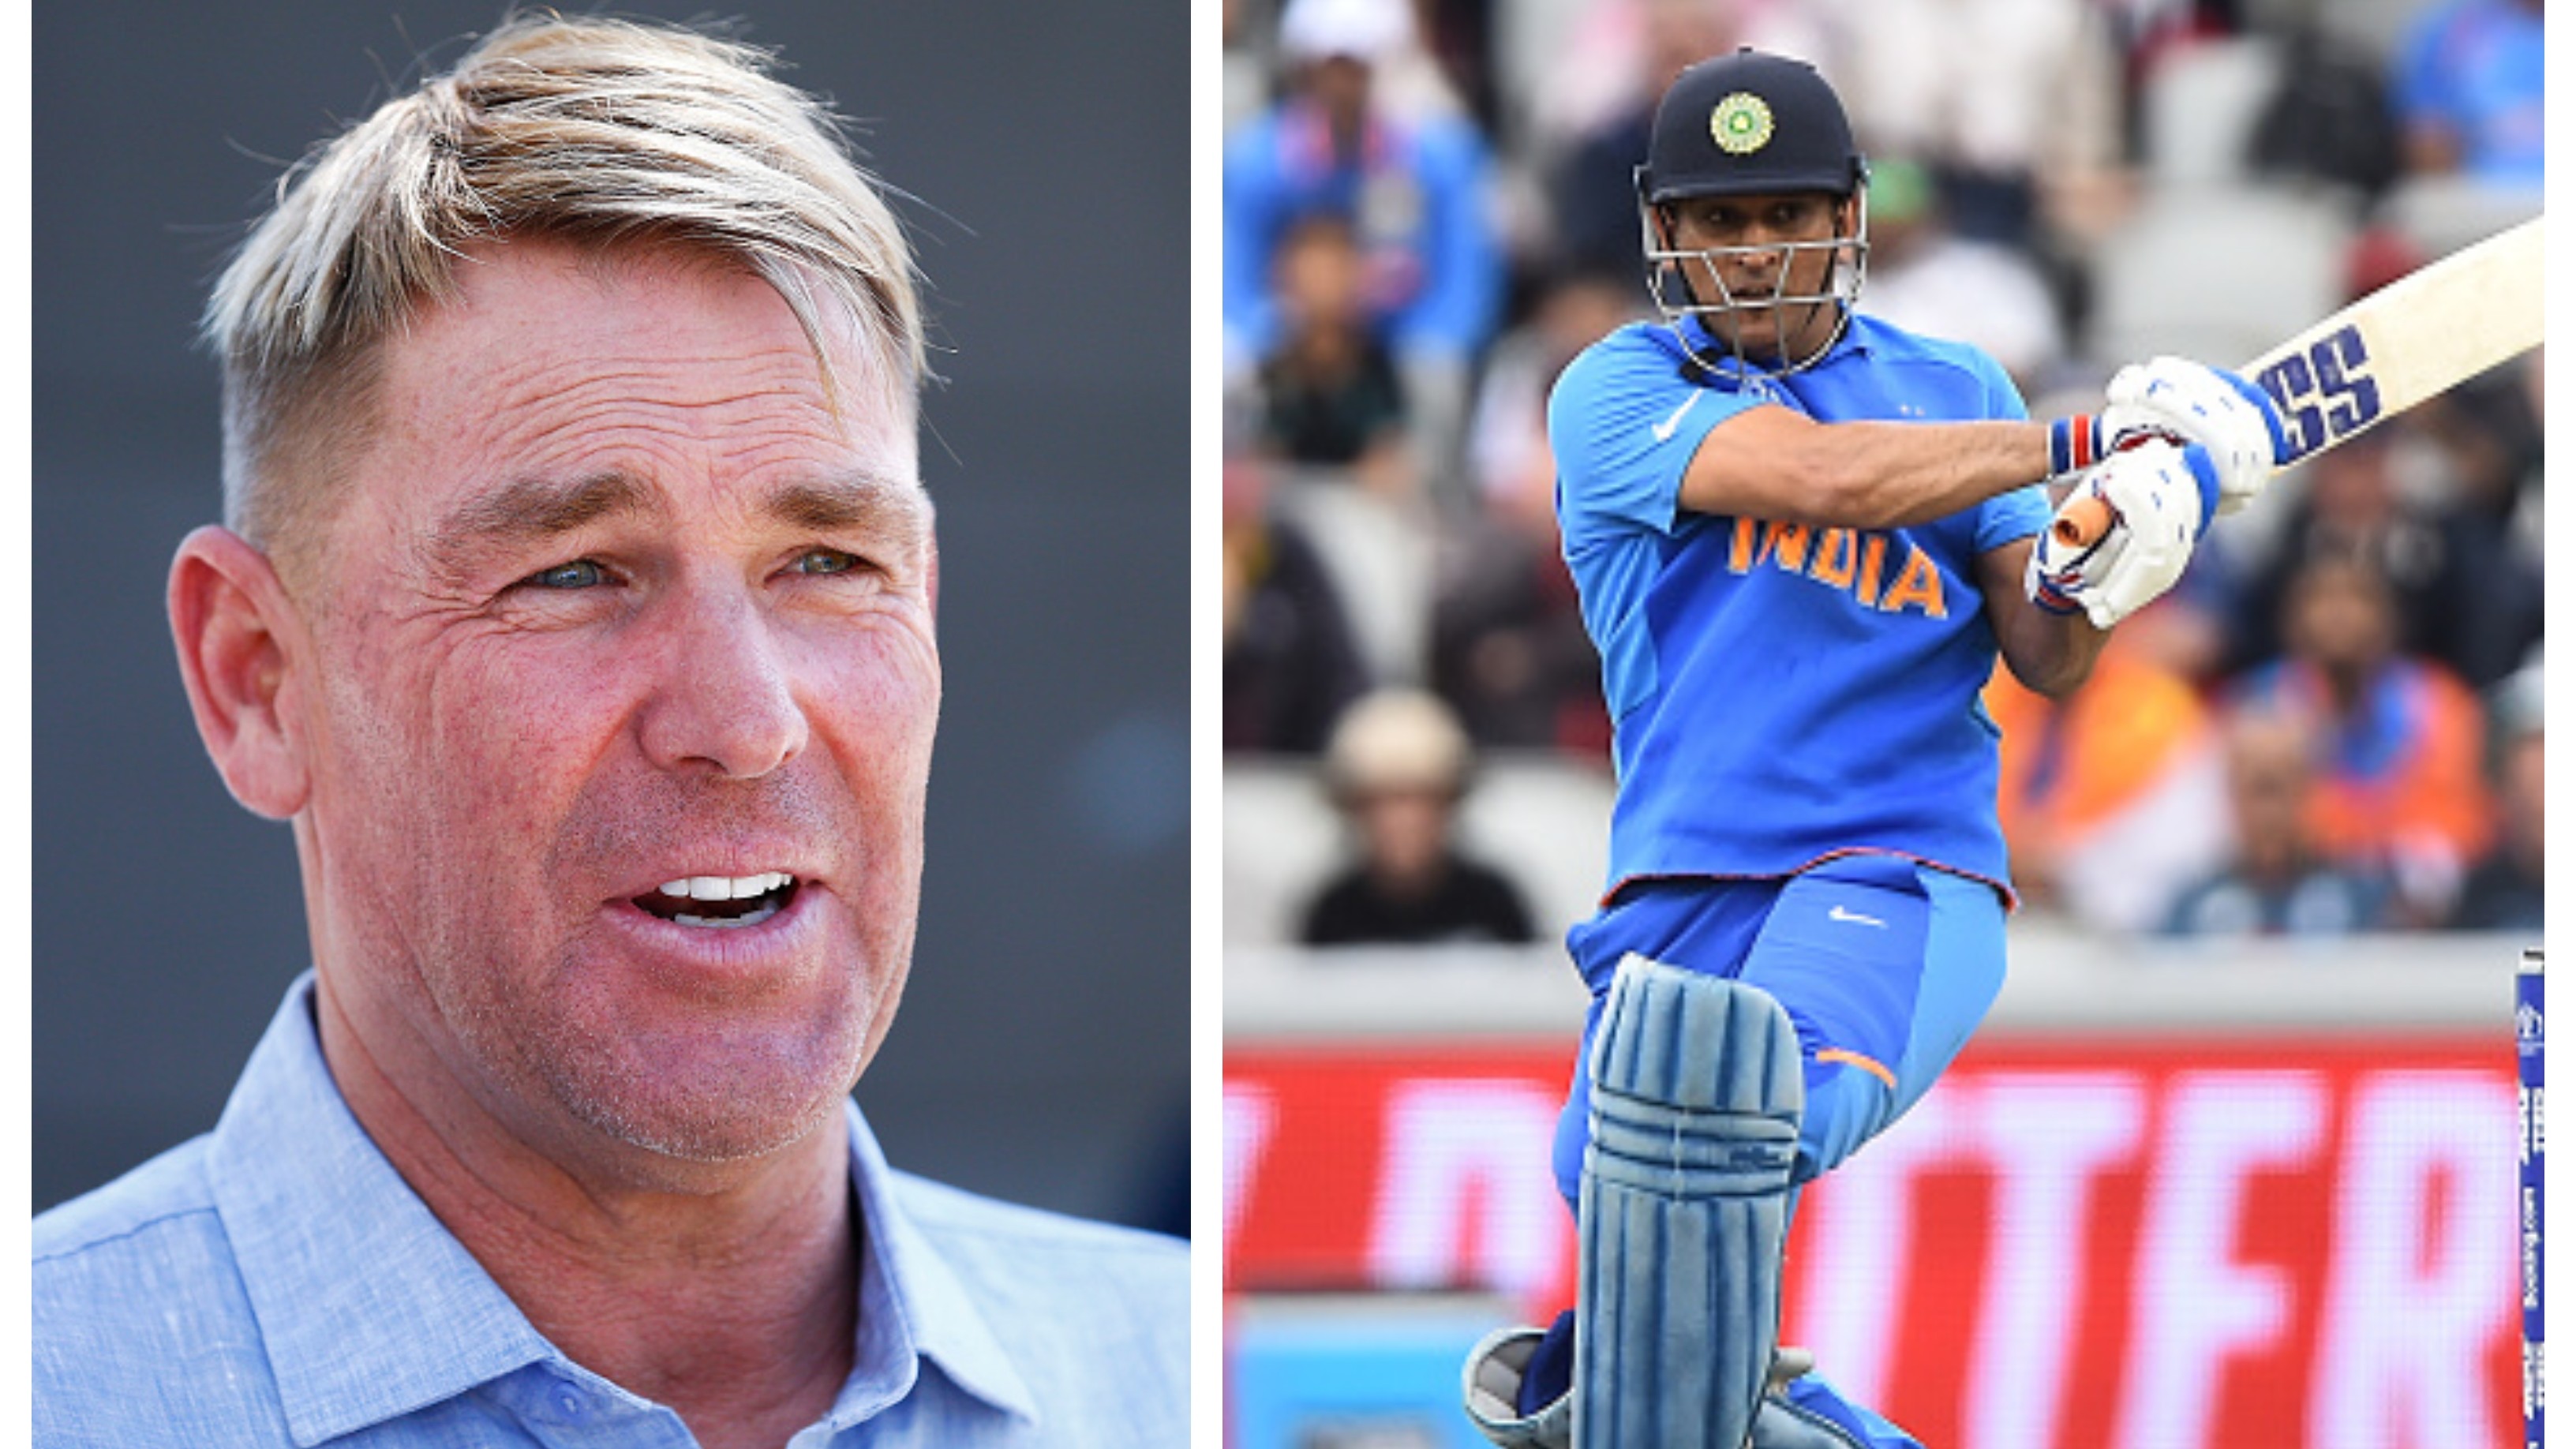 Shane Warne offers MS Dhoni to play 'The Hundred' after international retirement 